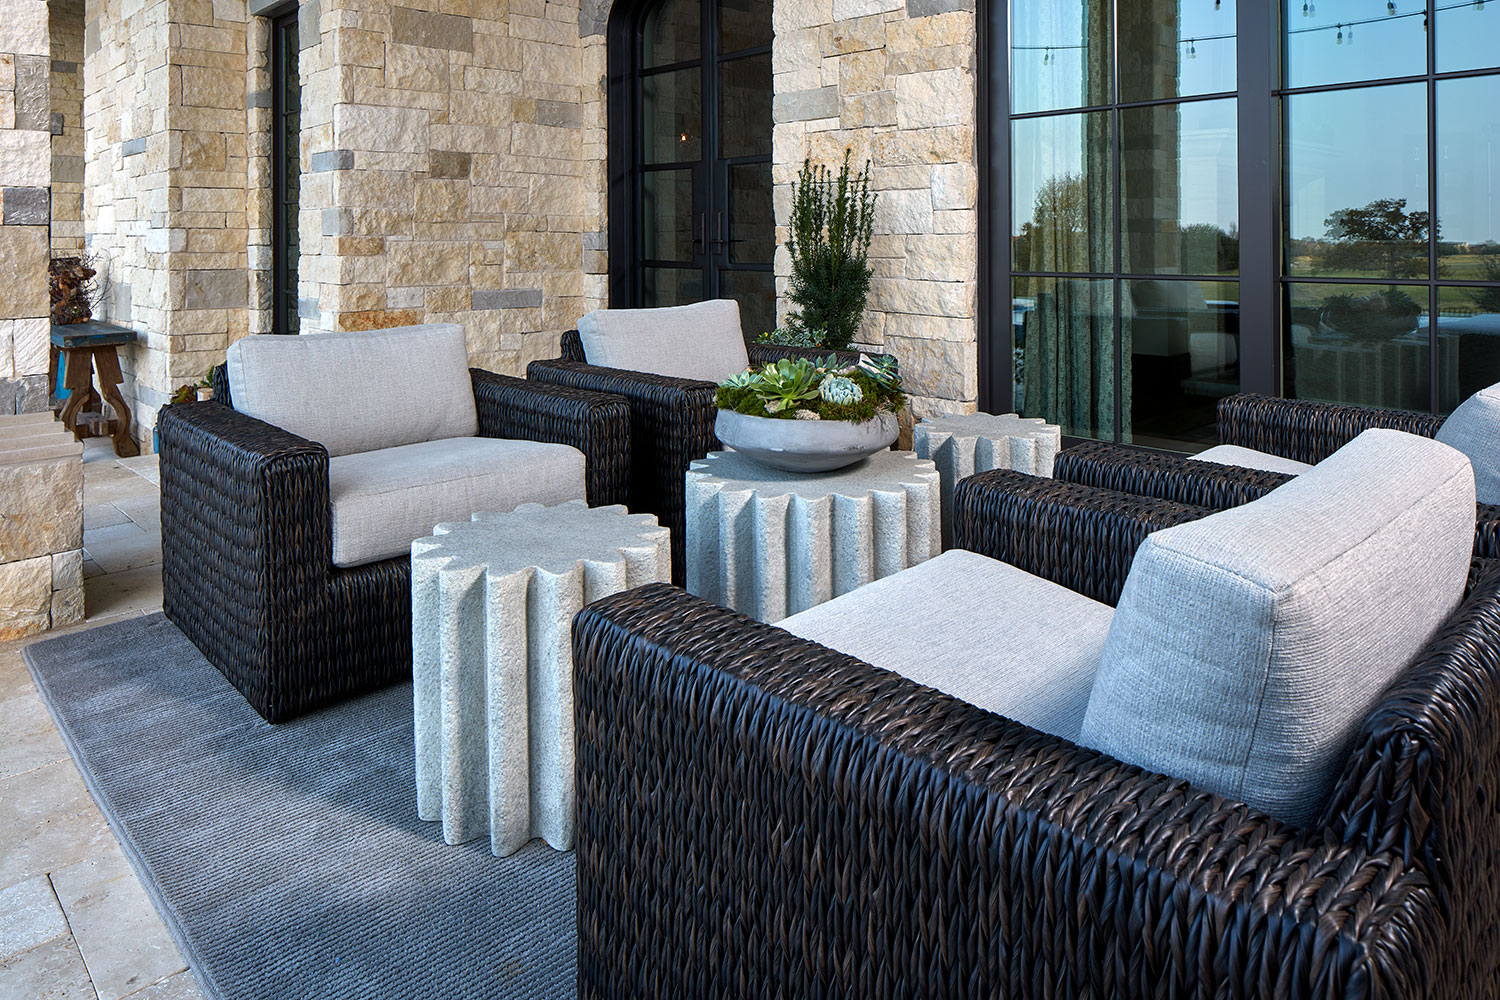 Outdoor Cocktail Tables with Woven Upholstered Club Chairs